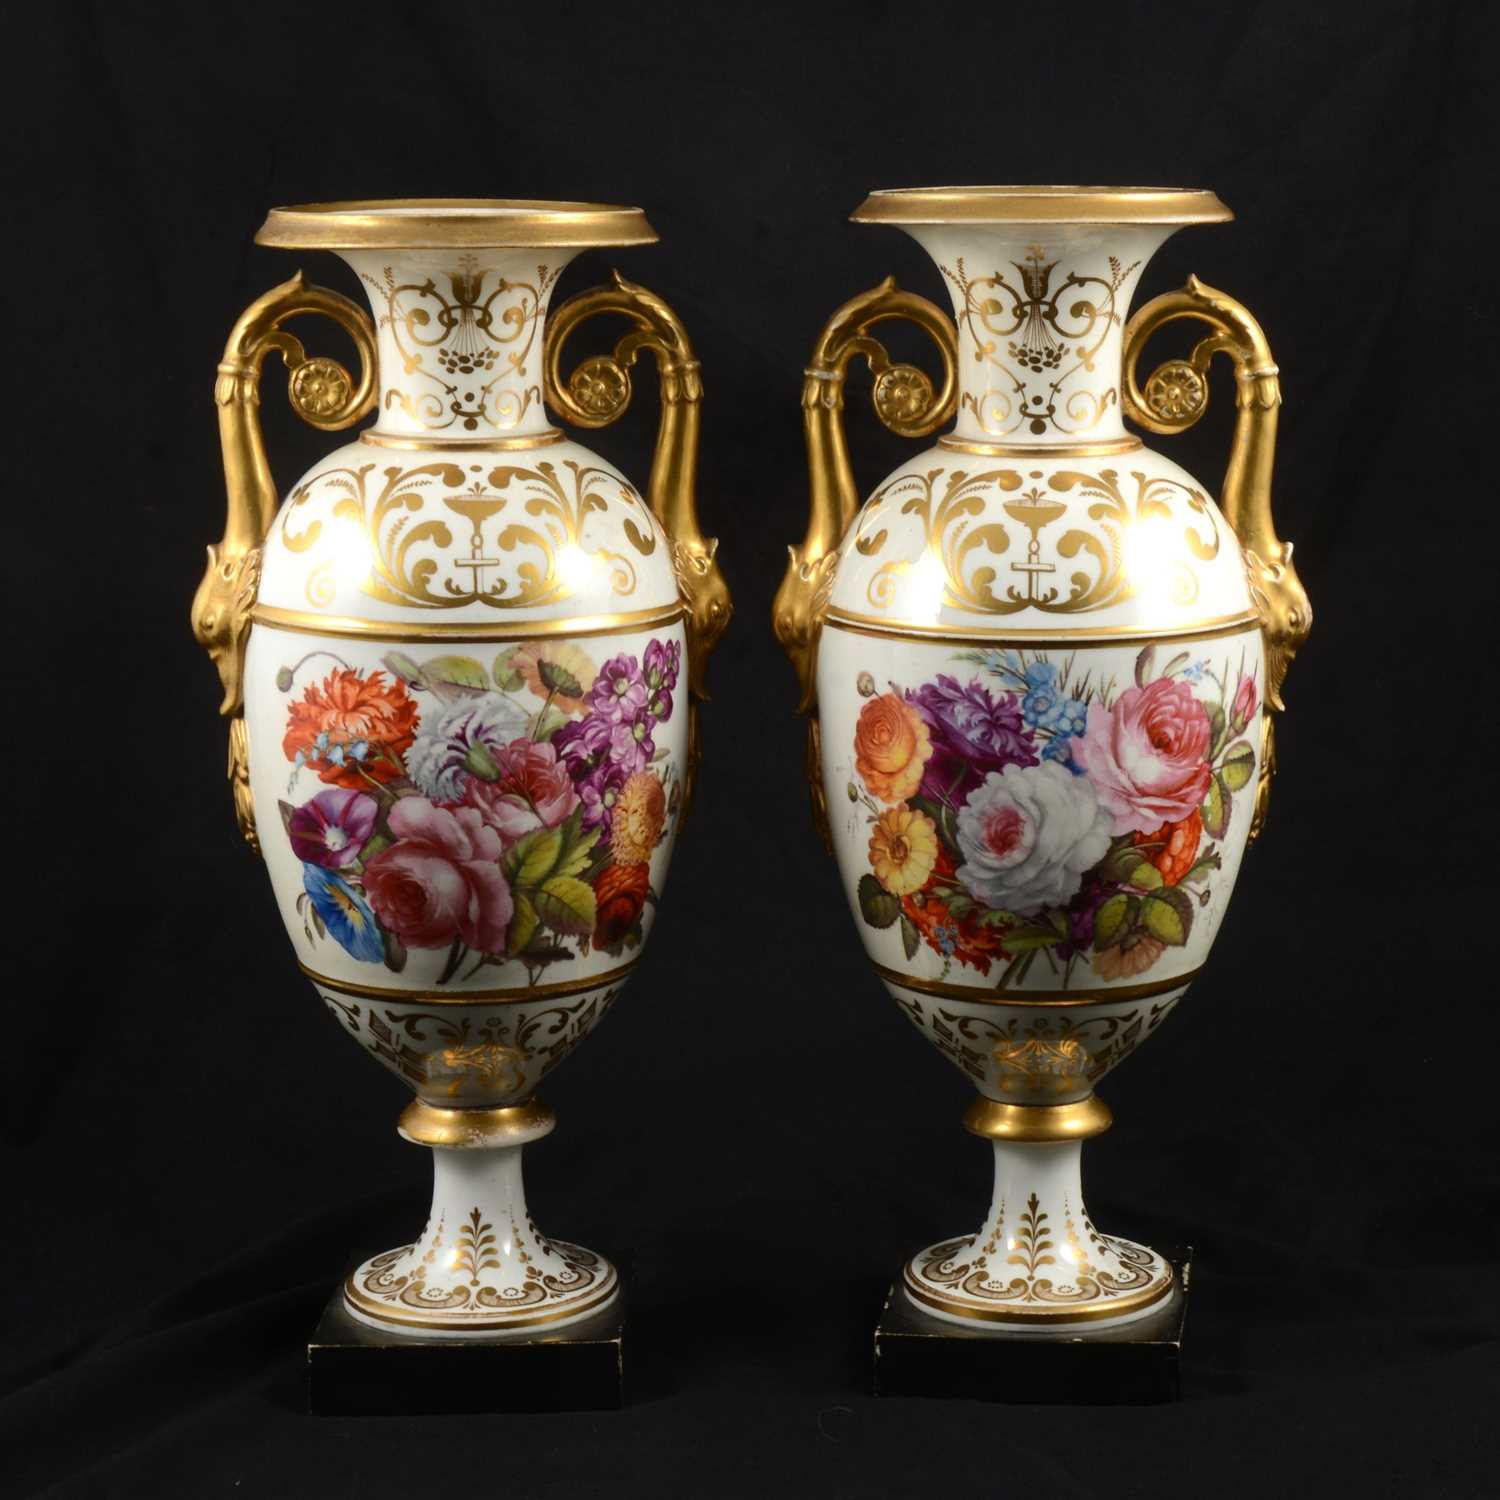 Pair of Nantgarw-style porcelain vases, early 19th century